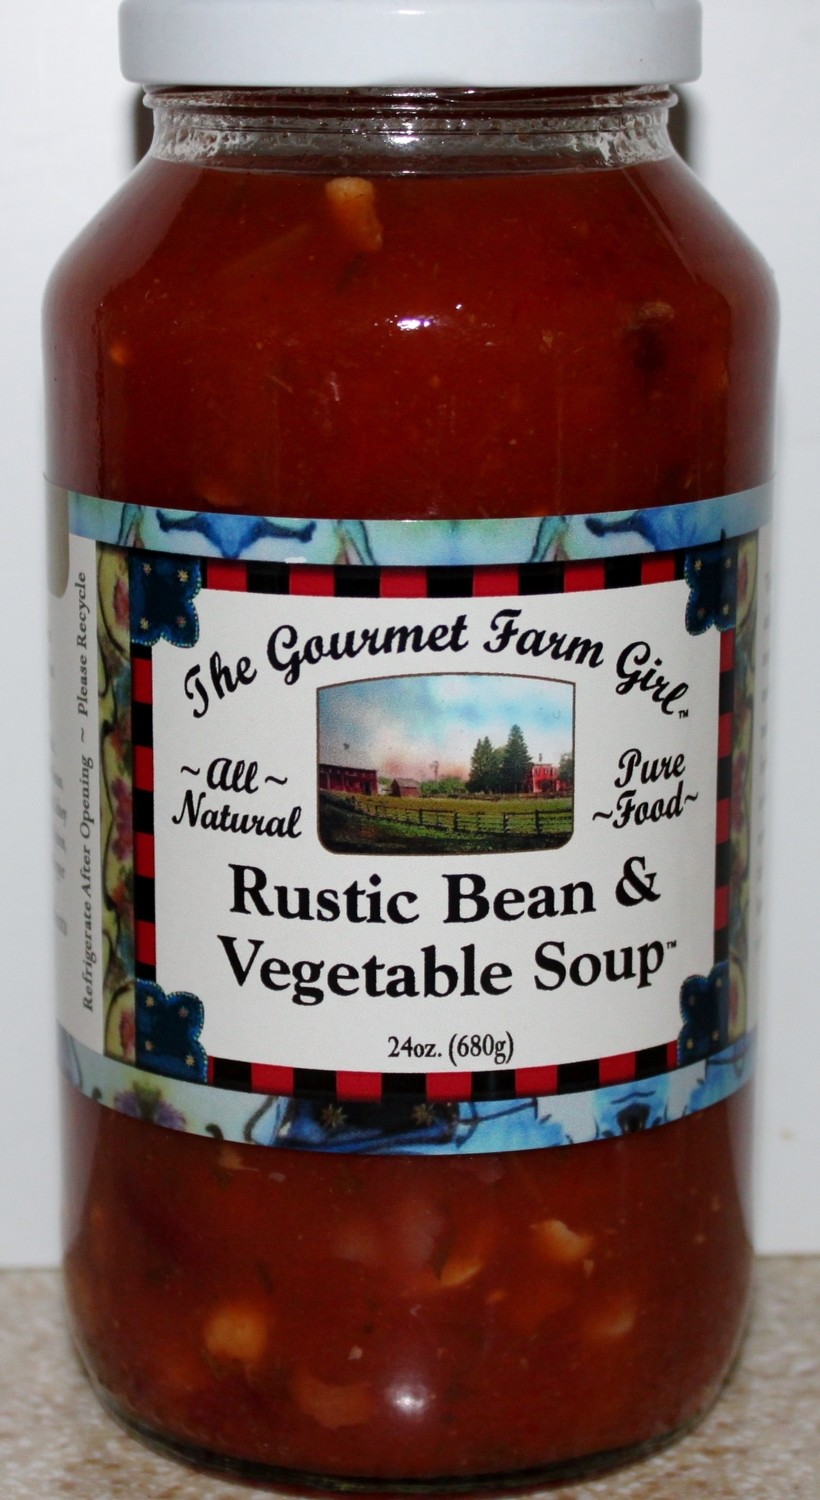 Rustic Bean and Vegetable Soup